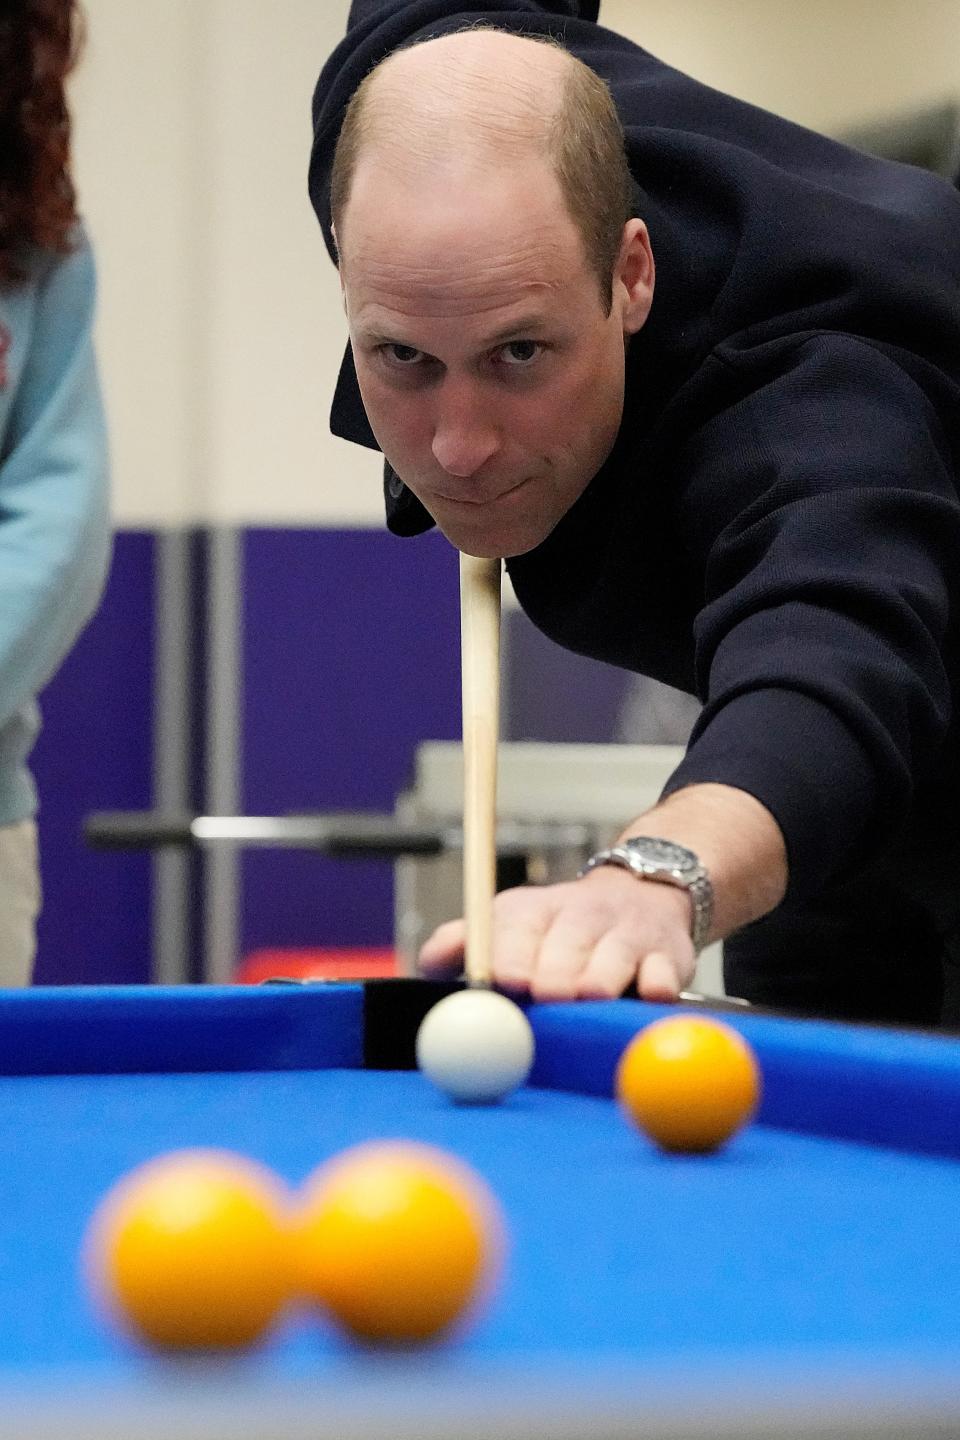 William playing pool, focusing on cueing the white ball